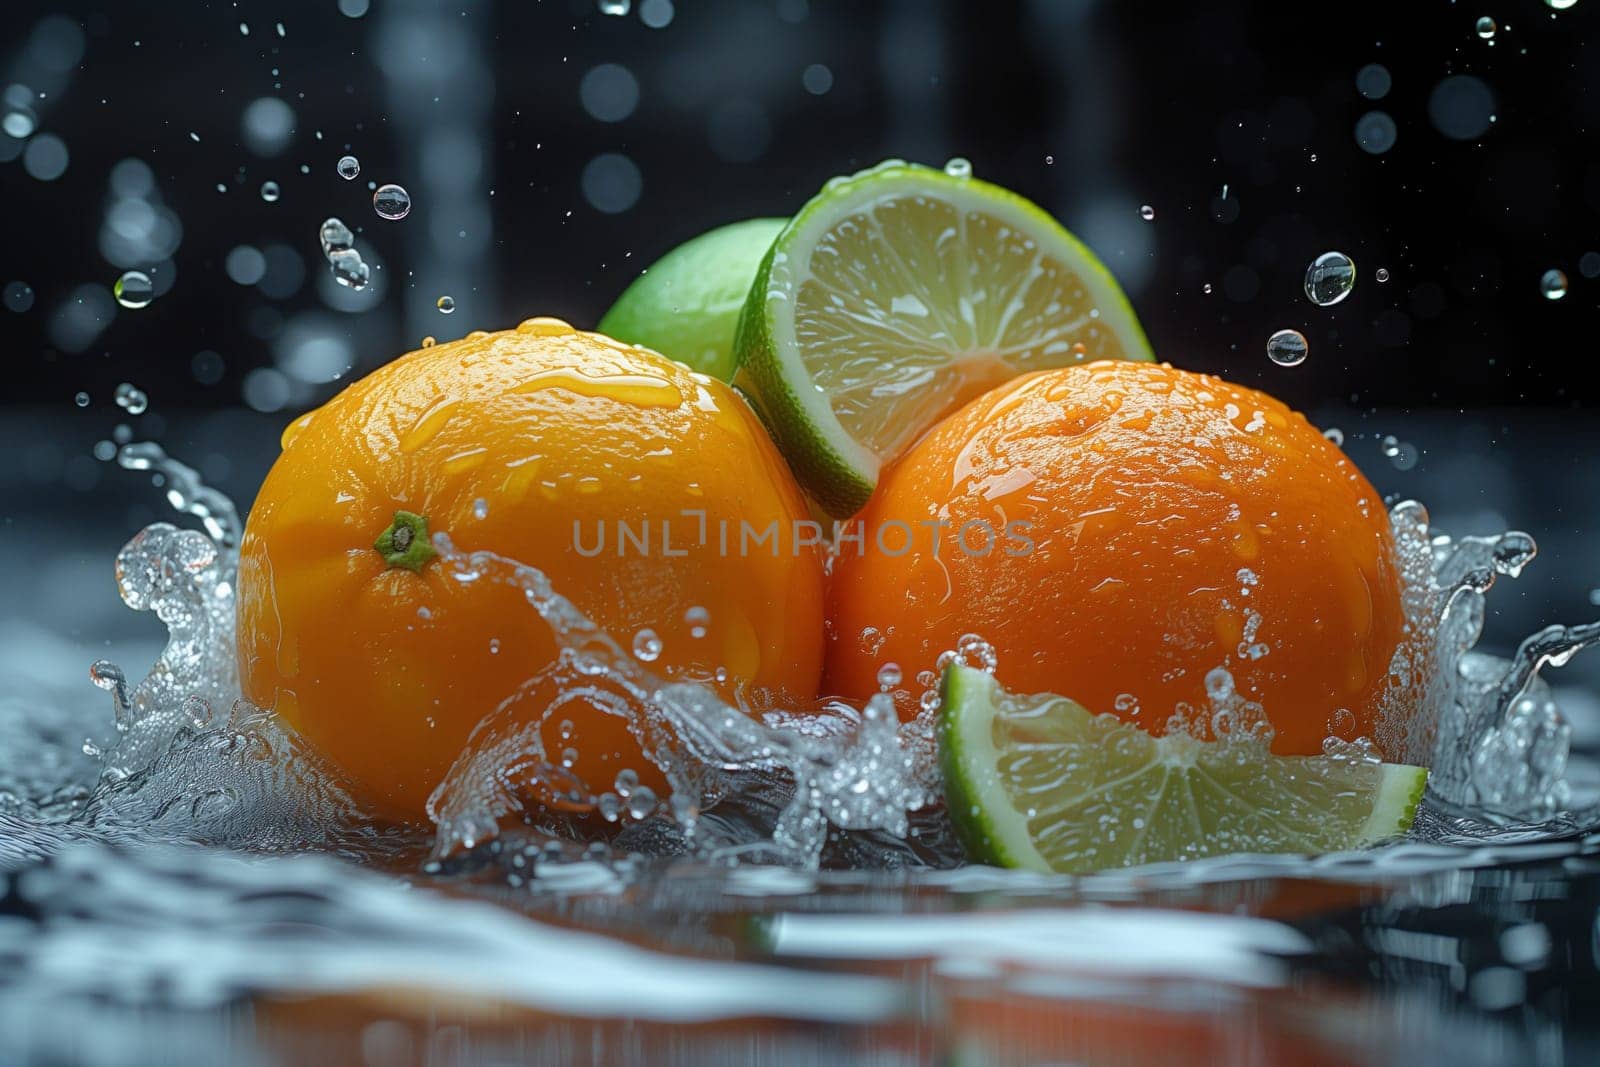 Various citrus fruits like Valencia oranges, Clementines, Rangpurs, and Bitter oranges are splashing in the water, showcasing the vibrant colors and refreshing taste of natural foods